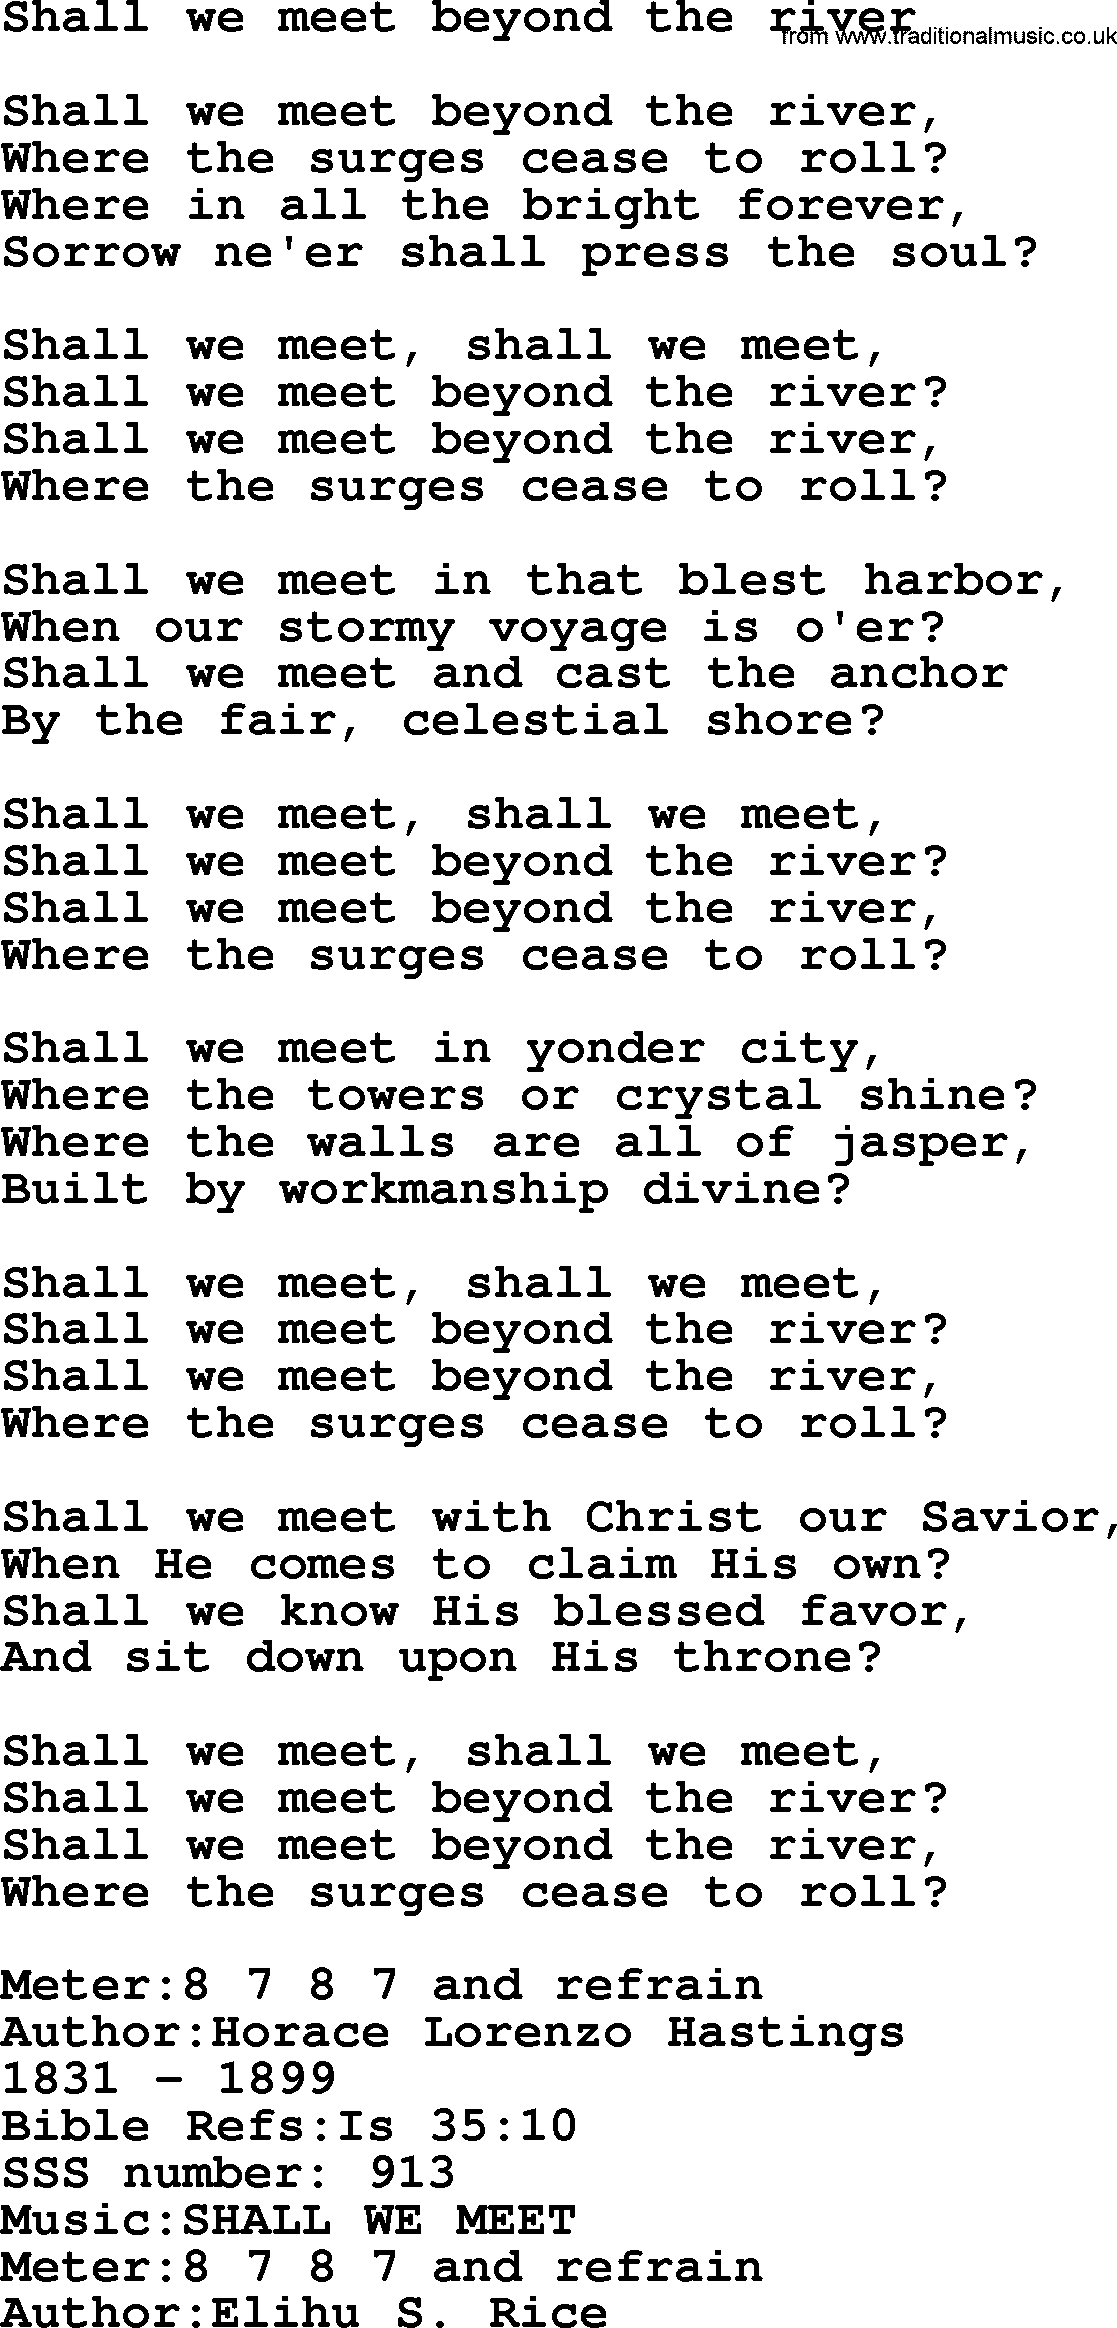 Sacred Songs and Solos complete, 1200 Hymns, title: Shall We Meet Beyond The River, lyrics and PDF